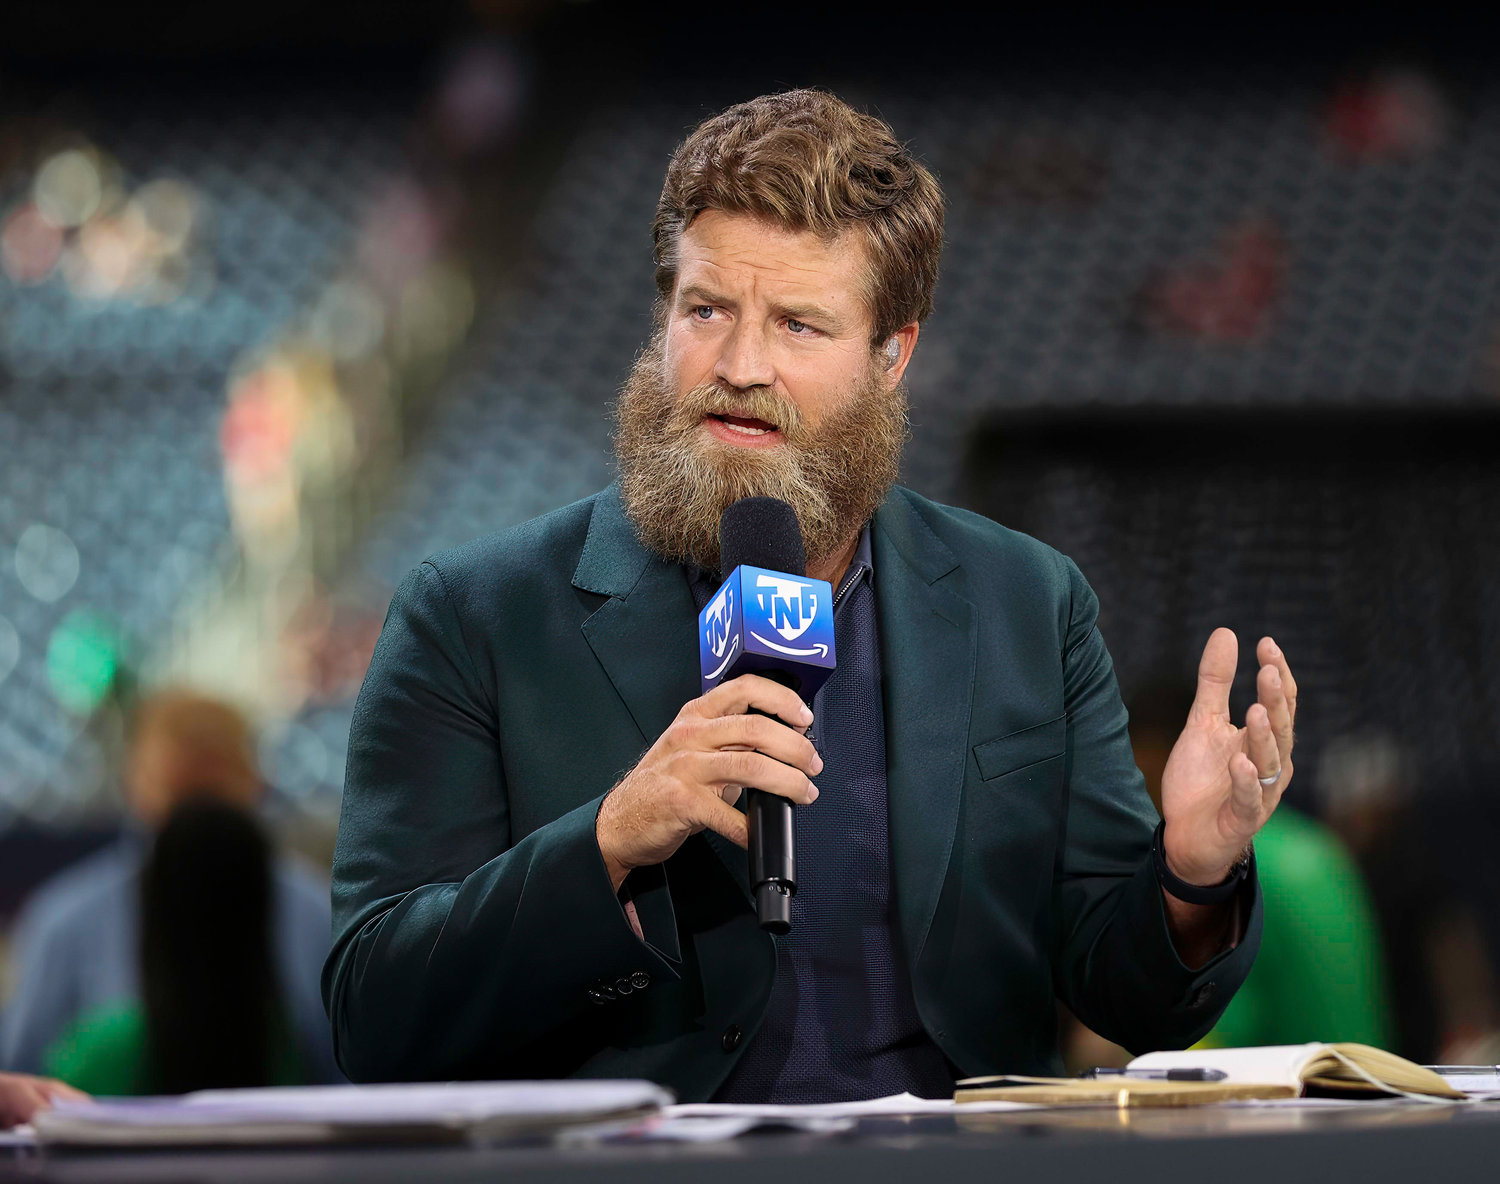 Former NFL quarterback Ryan Fitzpatrick on Amazon’s Thursday Night Football pregame show before the start of a preseason game between the Texans and the 49ers in Houston, Texas, on August 25, 2022.